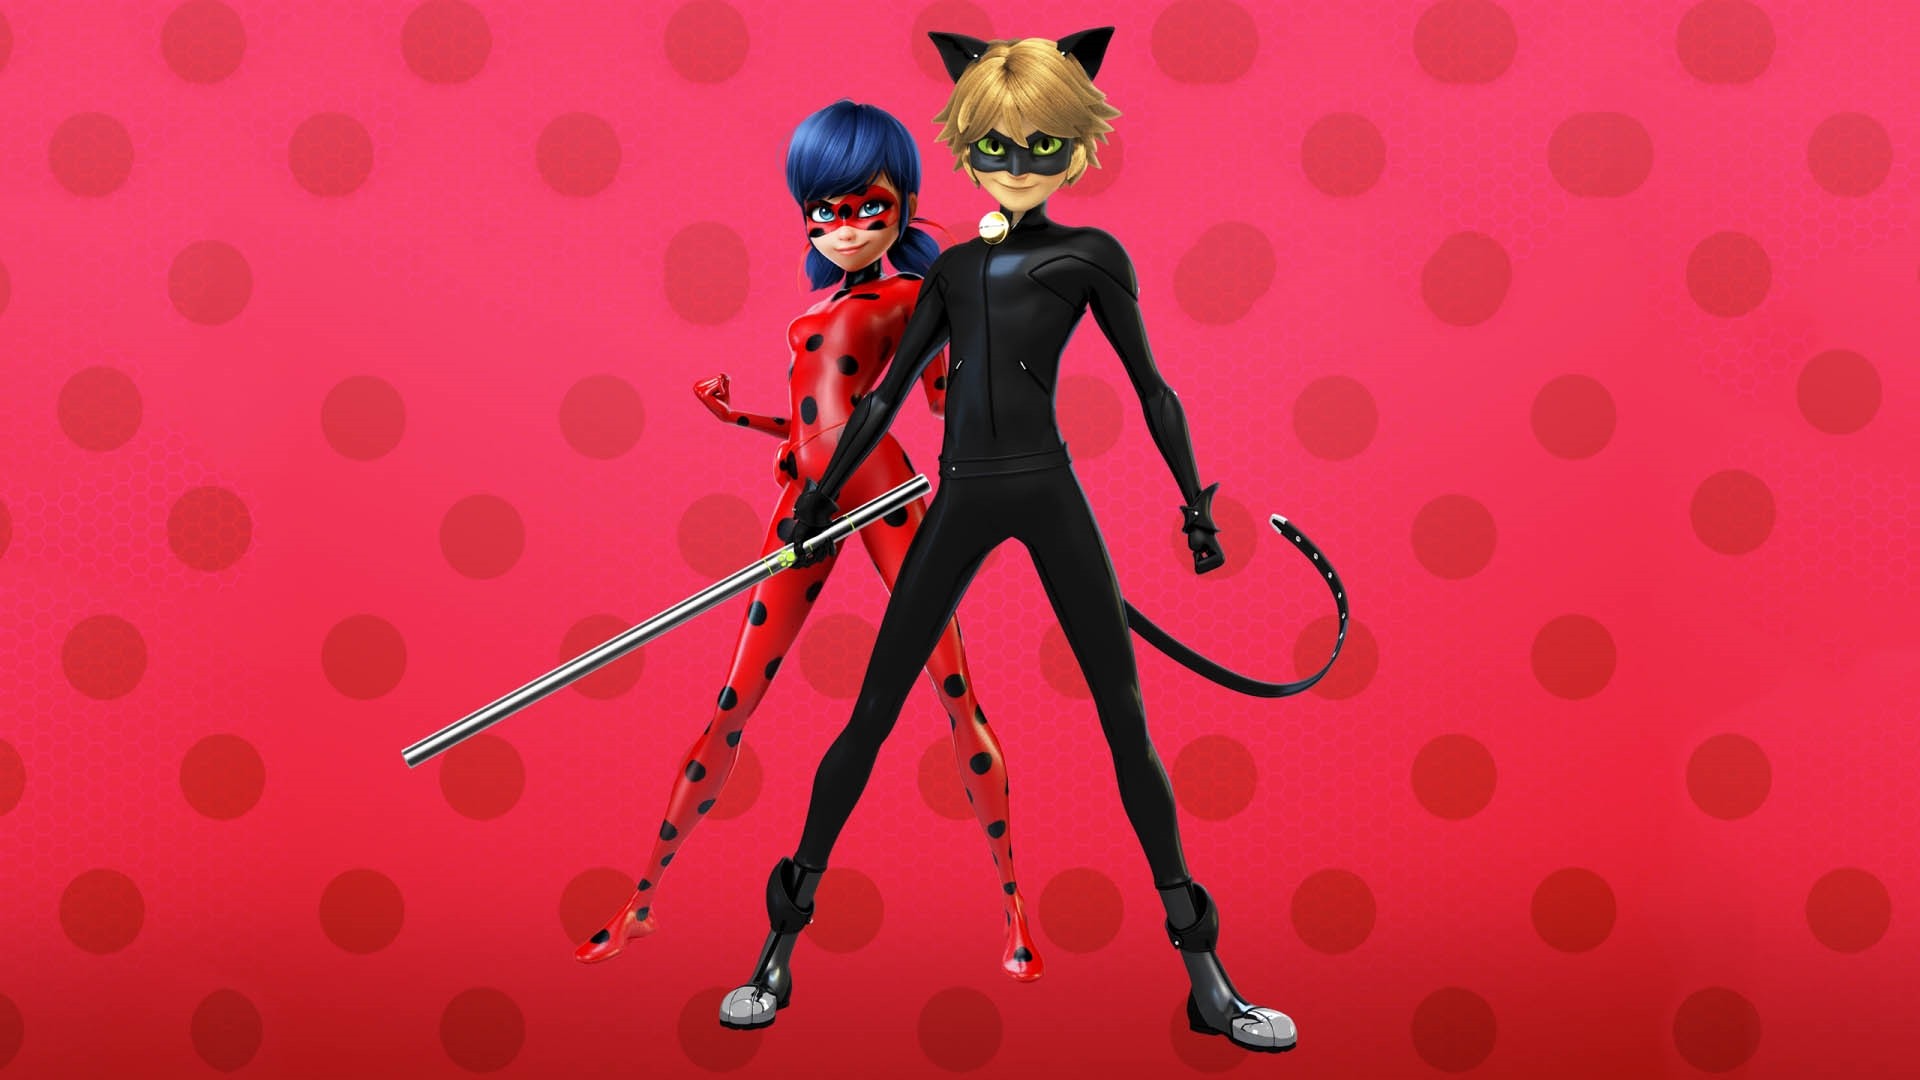 Miraculous Ladybug Wallpaper Picture hd